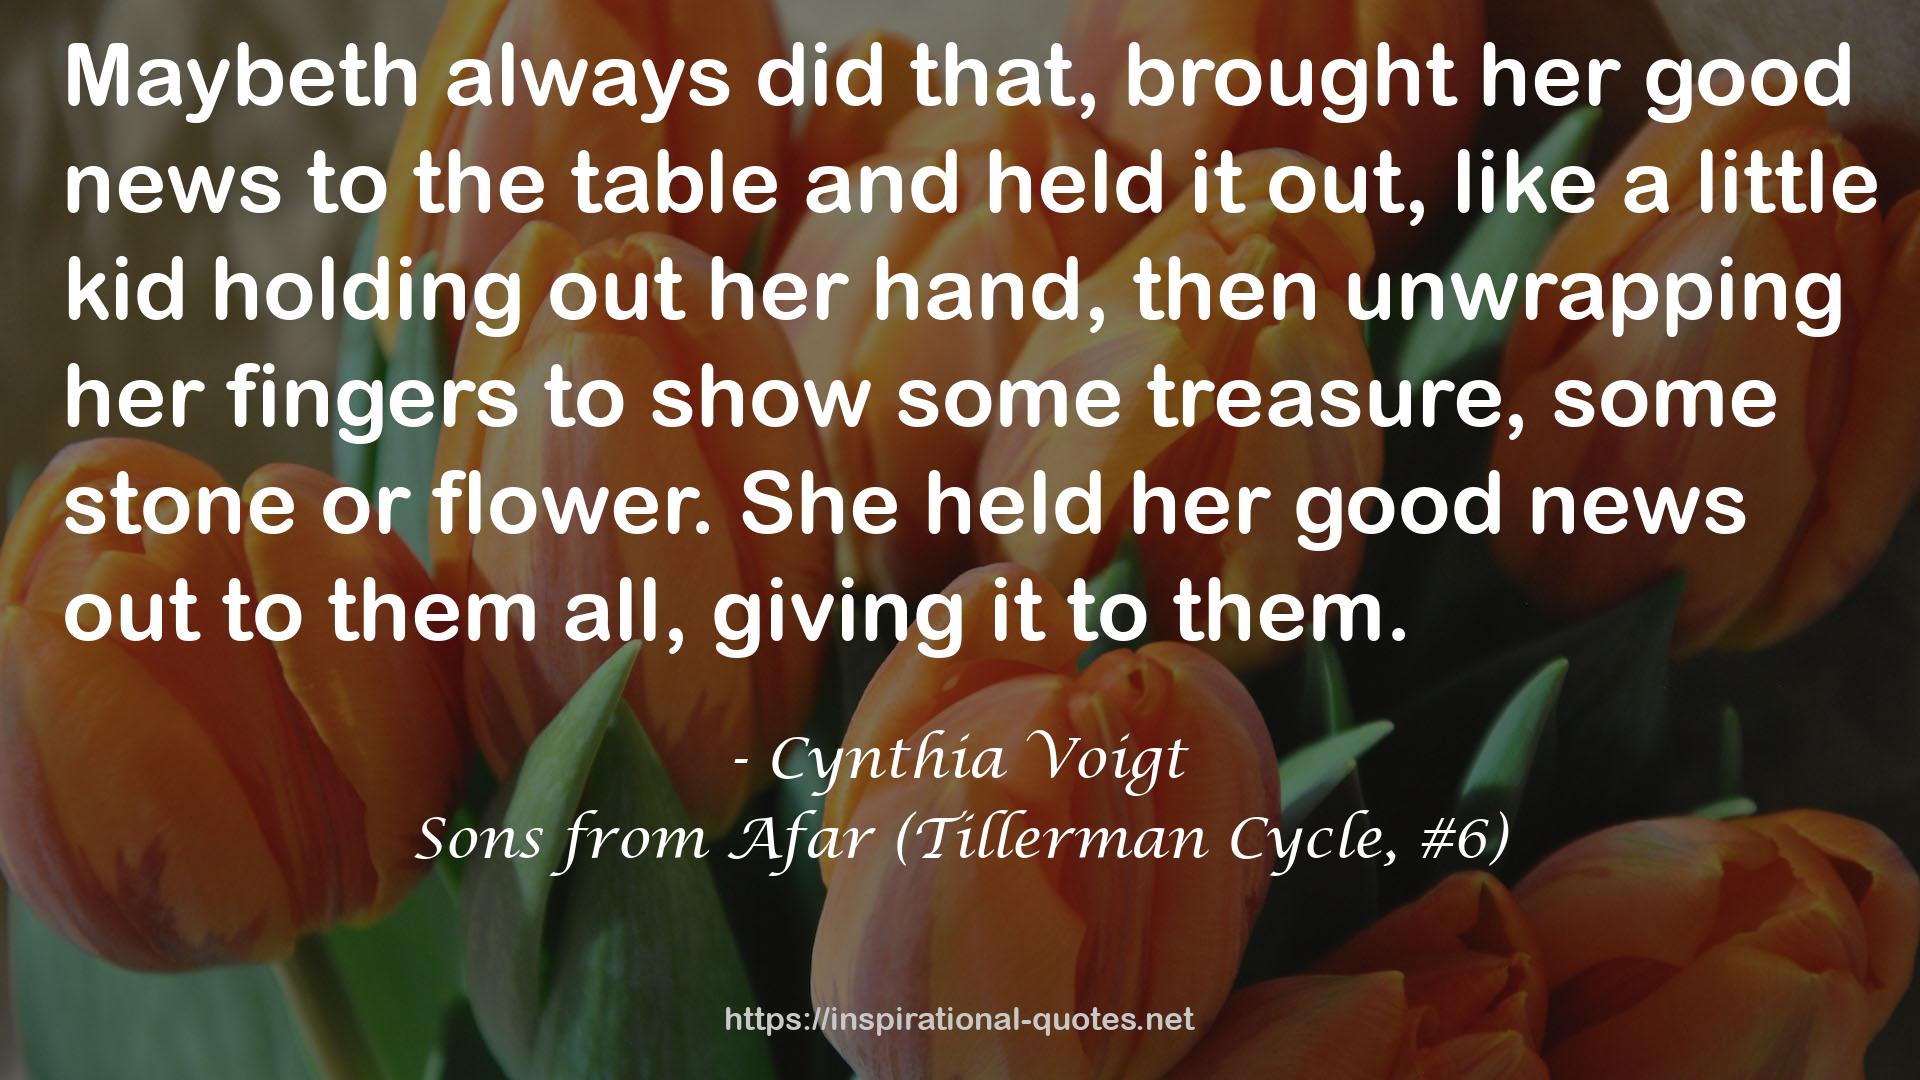 Sons from Afar (Tillerman Cycle, #6) QUOTES